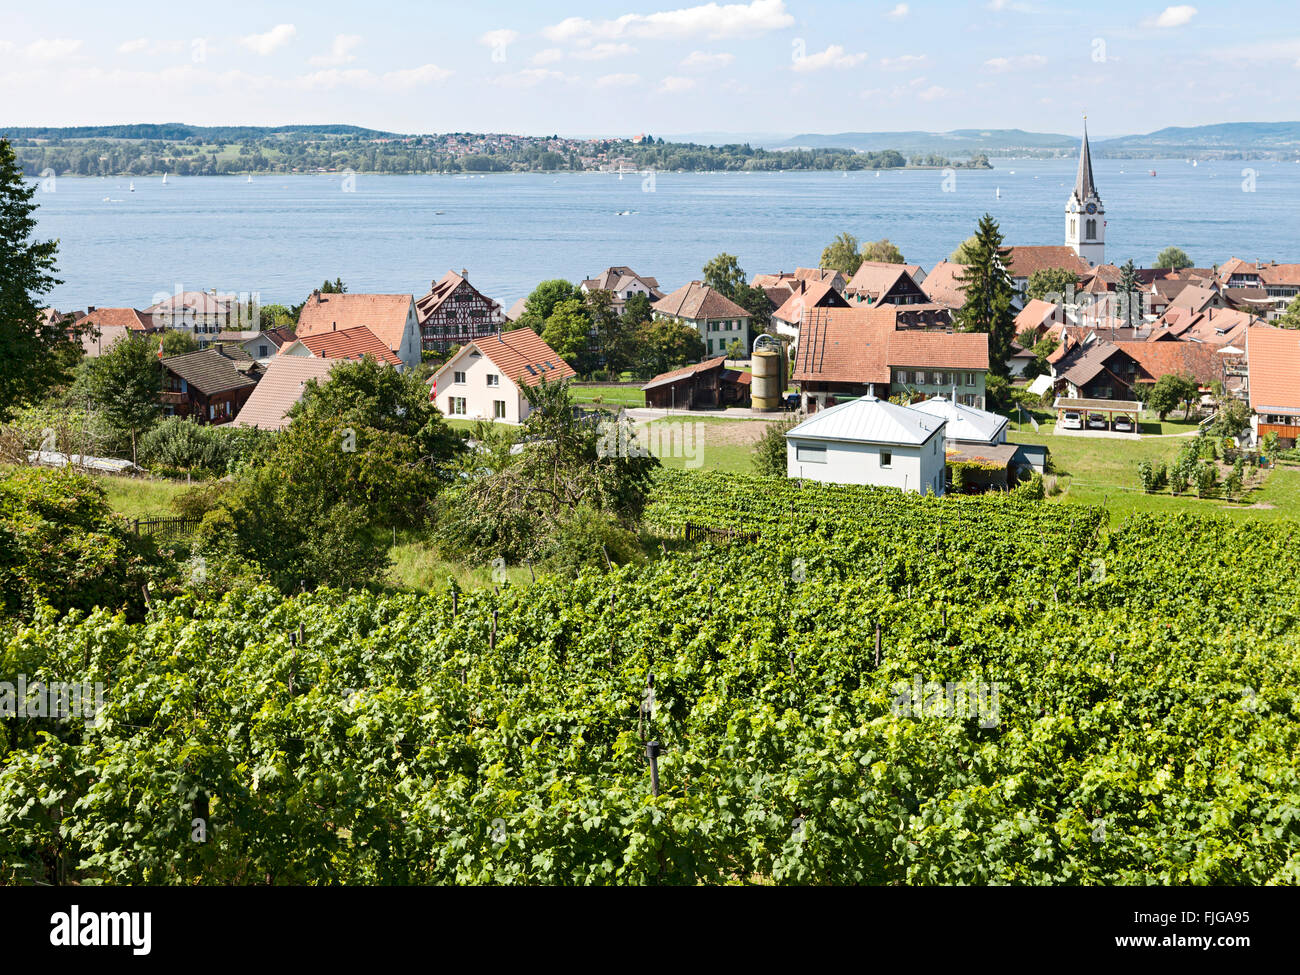 Vineyard, winery, with the village Ermatingen by Lake Constance, Switzerland Stock Photo